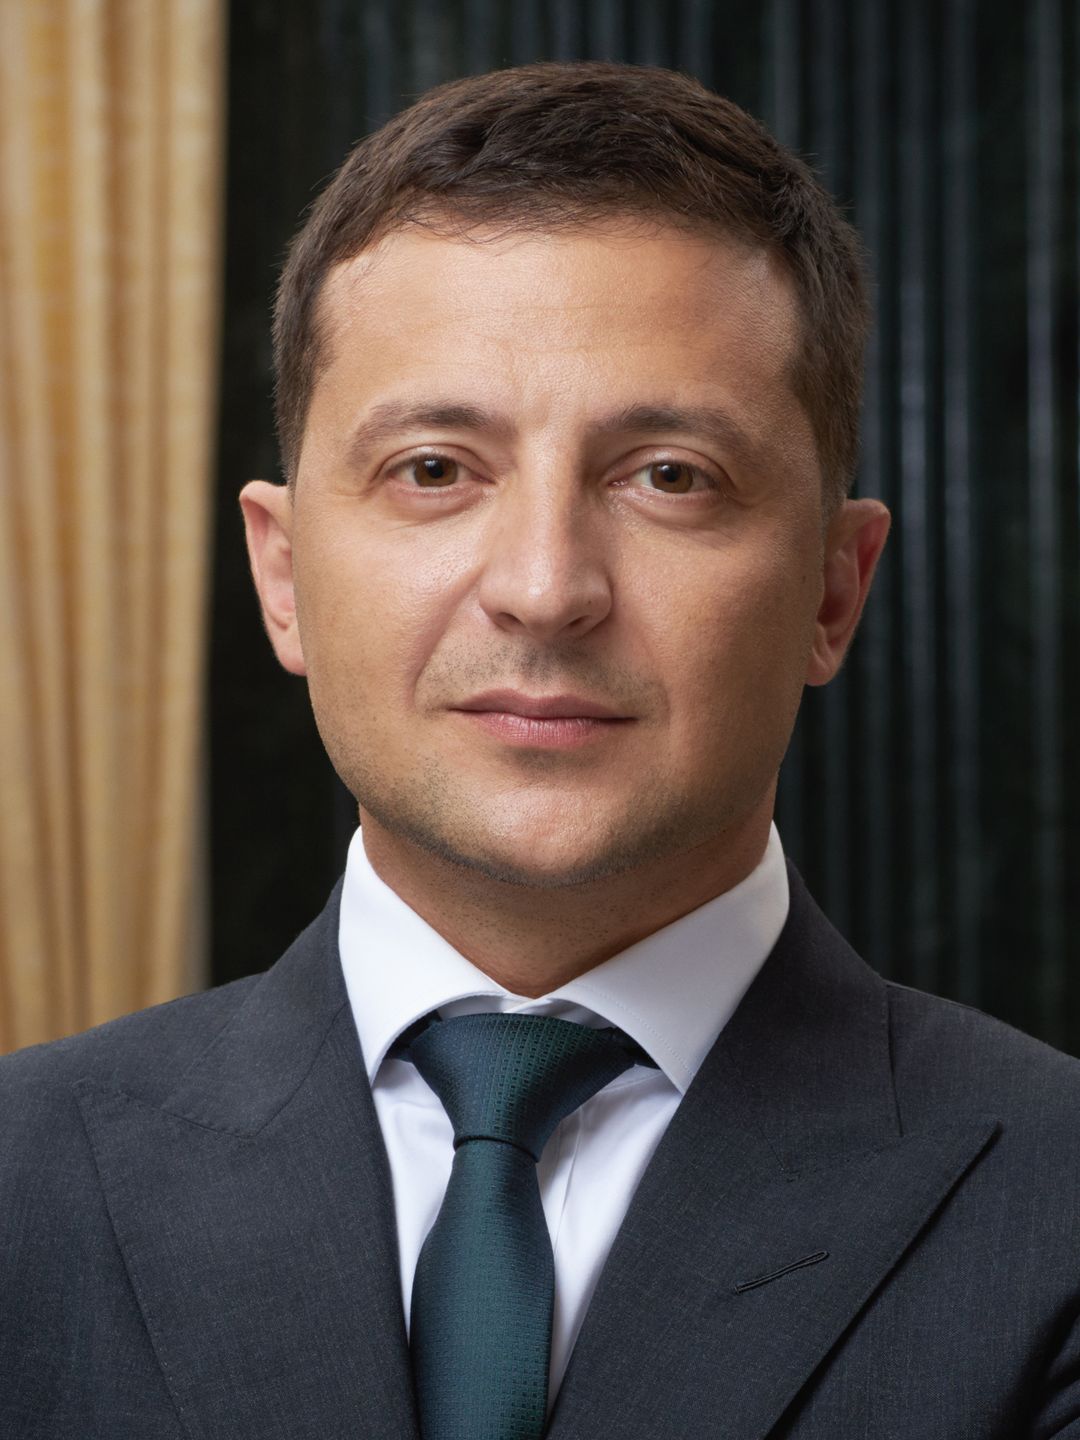 Volodymyr Zelenskiy does he have a wife